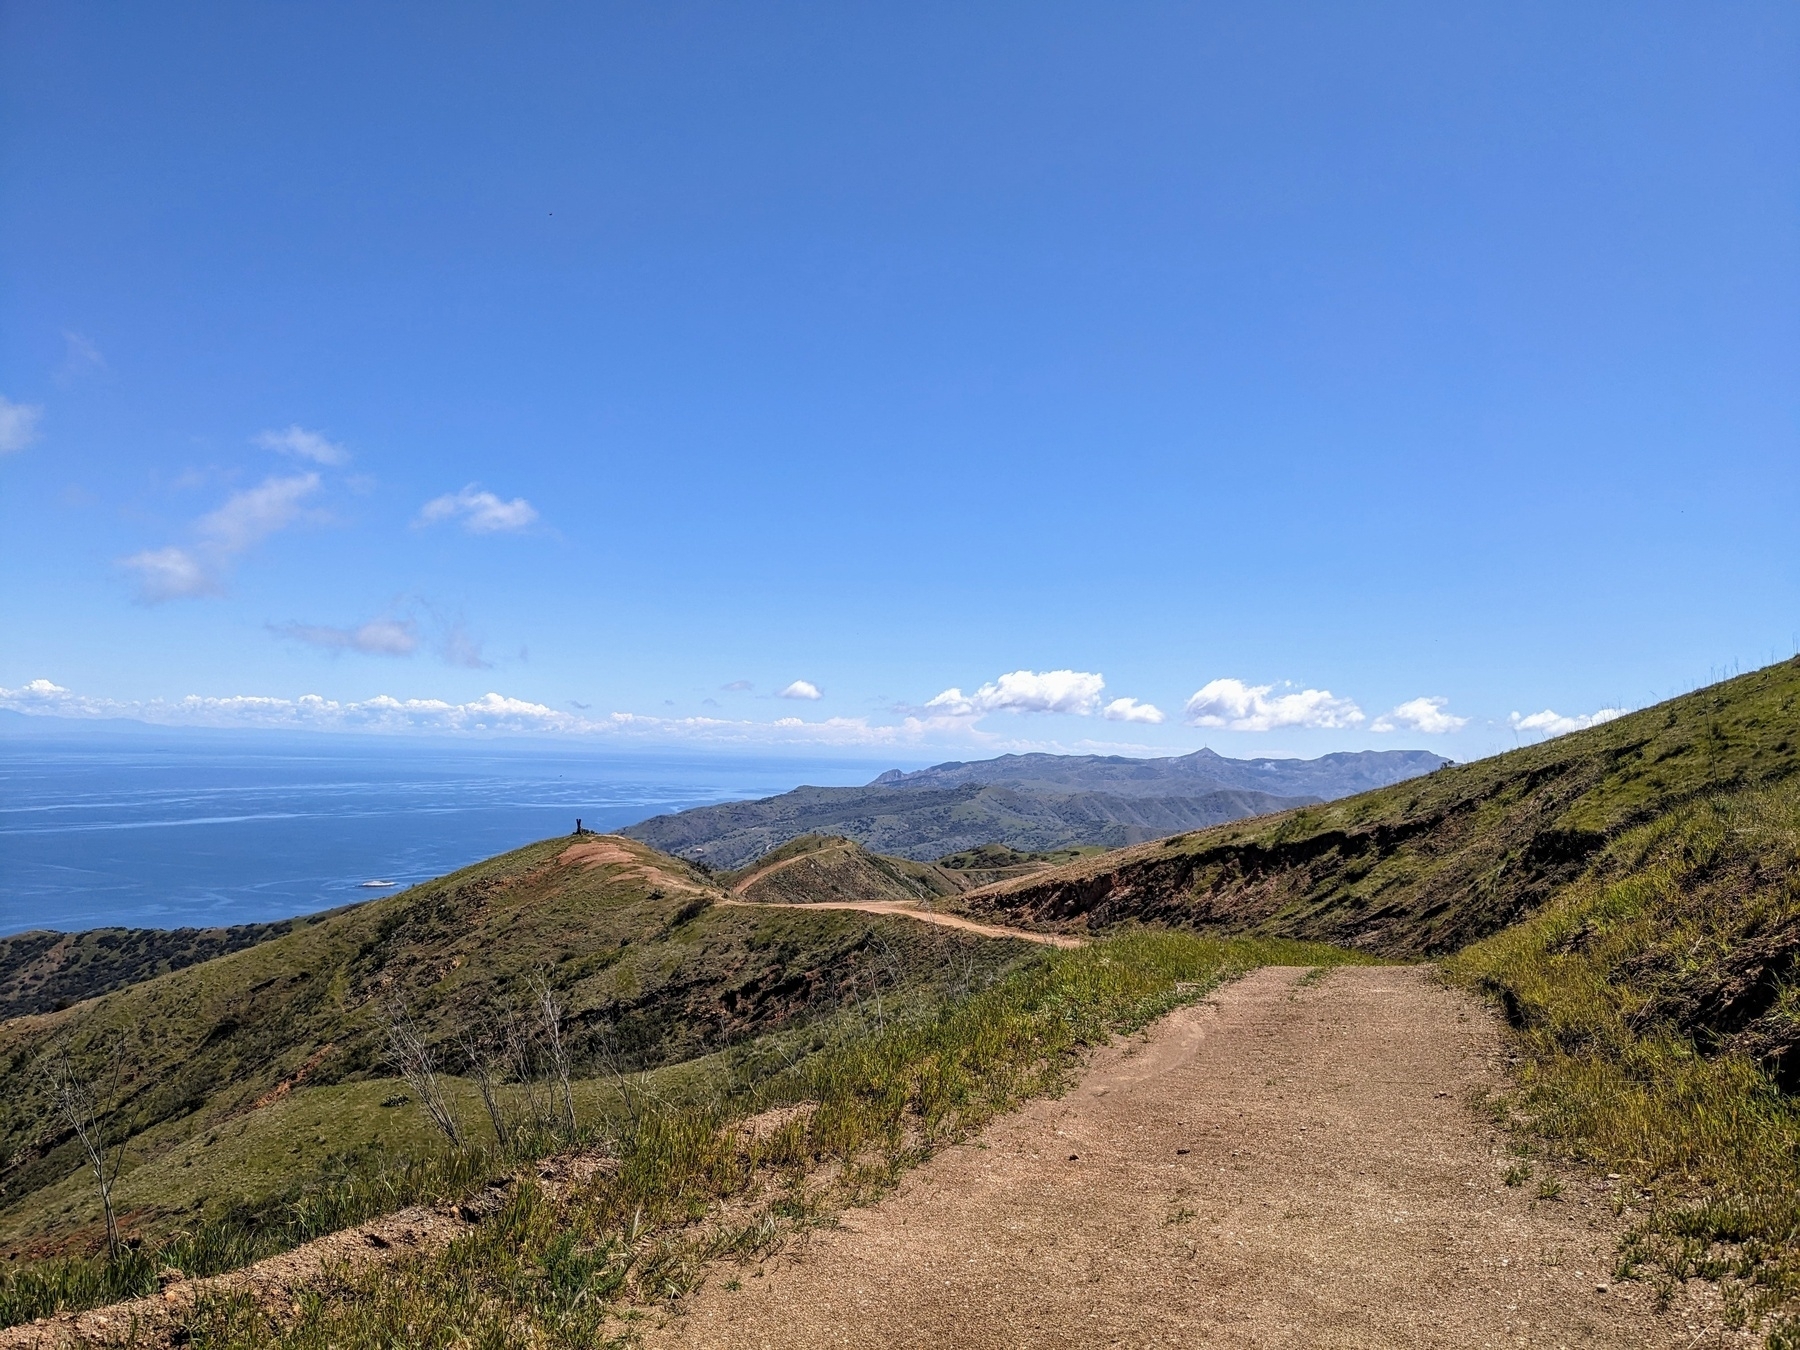 Photo of a hiking path that winds away into the distance. It is high elevation and can be seen following the tops of hills. The ocean can be seen on the far left corner and the sky above with clouds low and close to hills.&10;